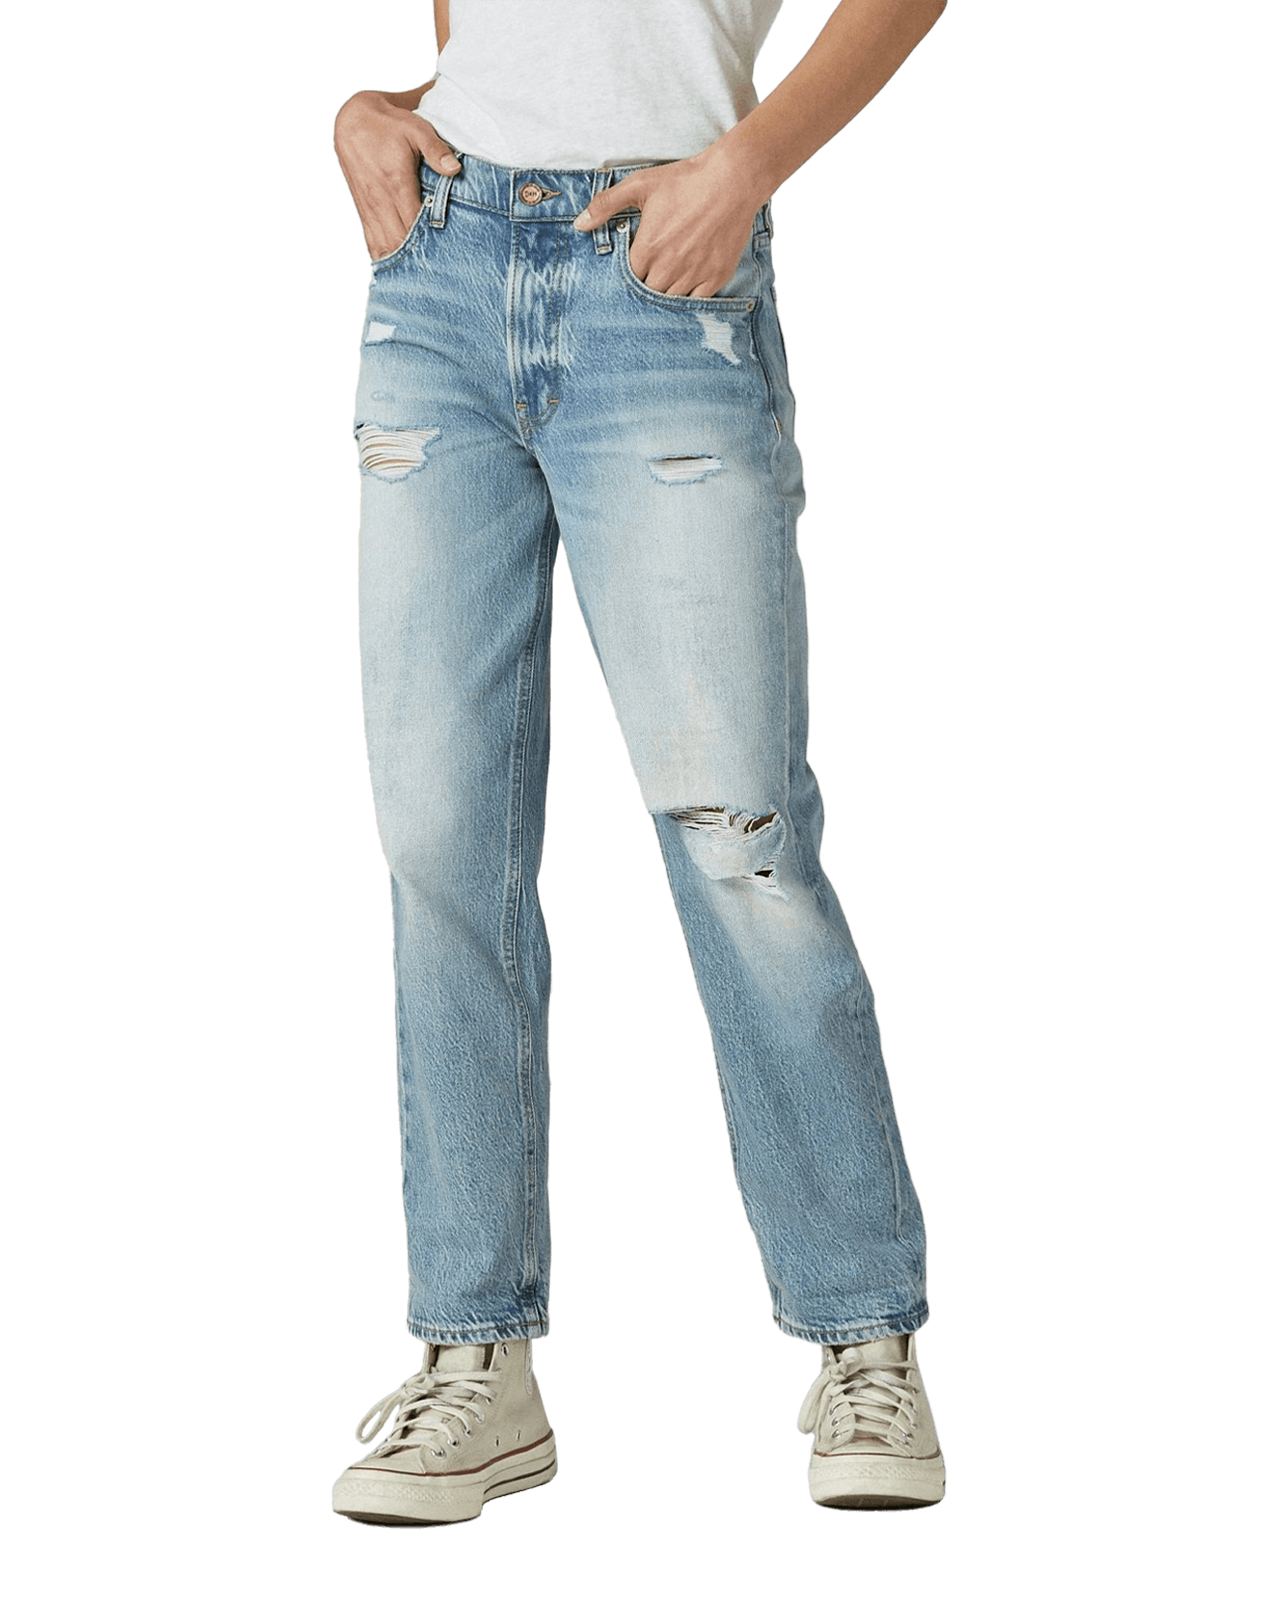 DENIM AND HYDE -MID RISE BOY JEAN _ Lucky Brand 04